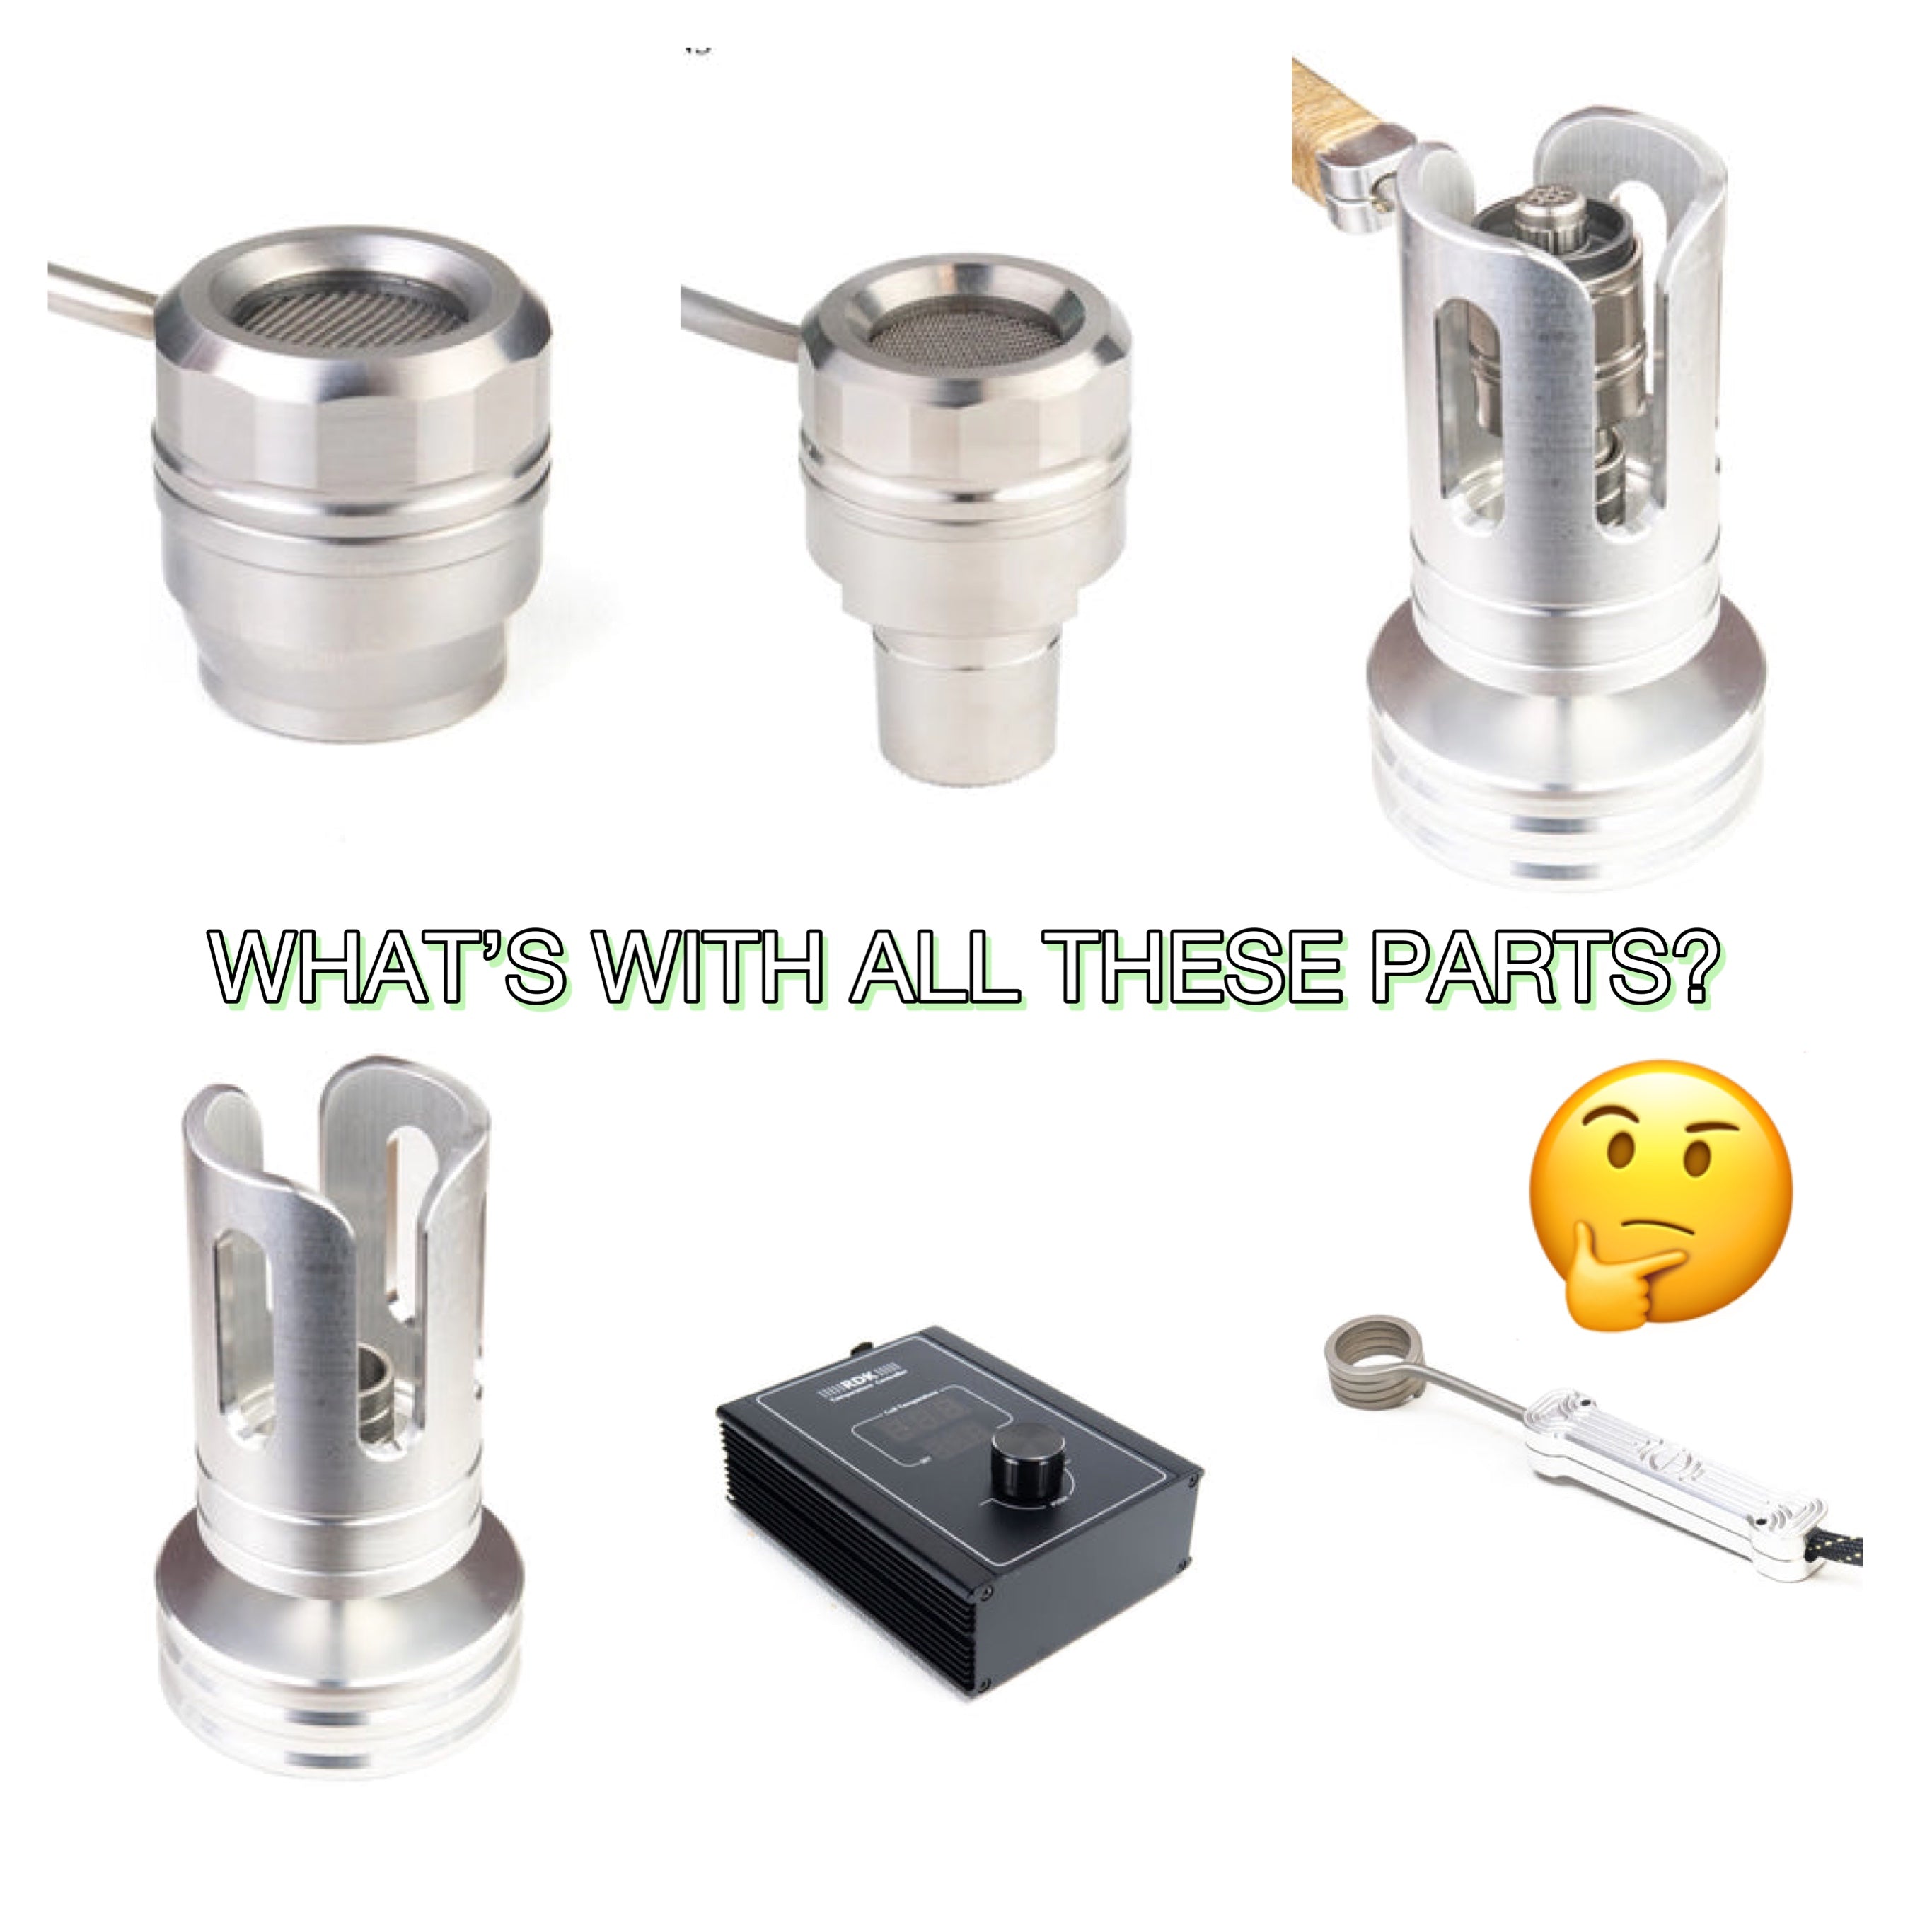 What's with all these parts?